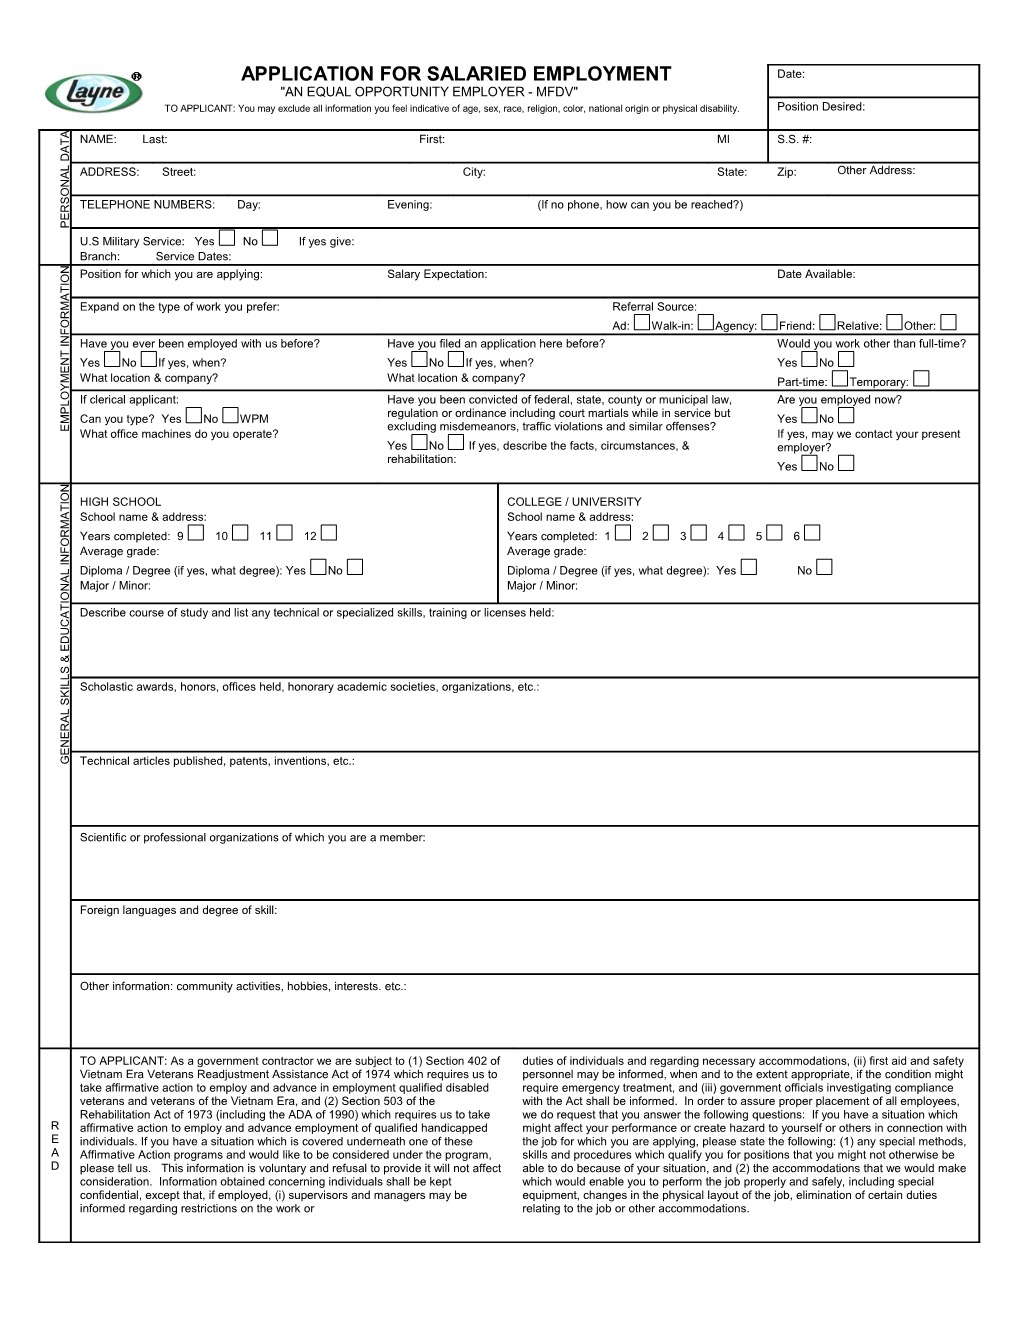 Application for Salaried Employment